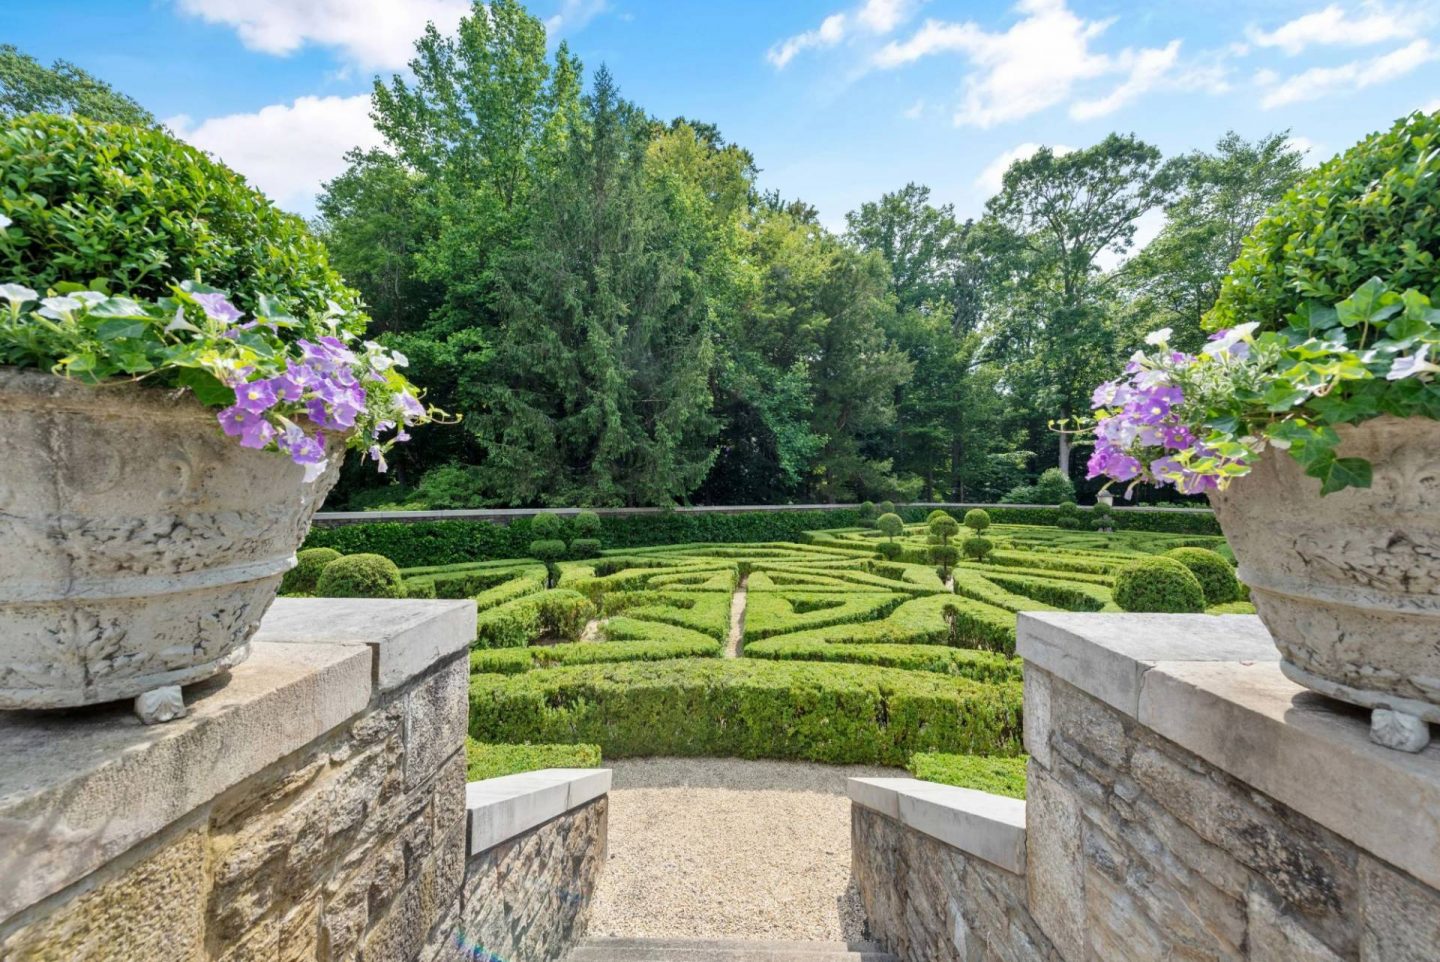 Vince Camuto's Widow to Auction Lavish Greenwich Estate